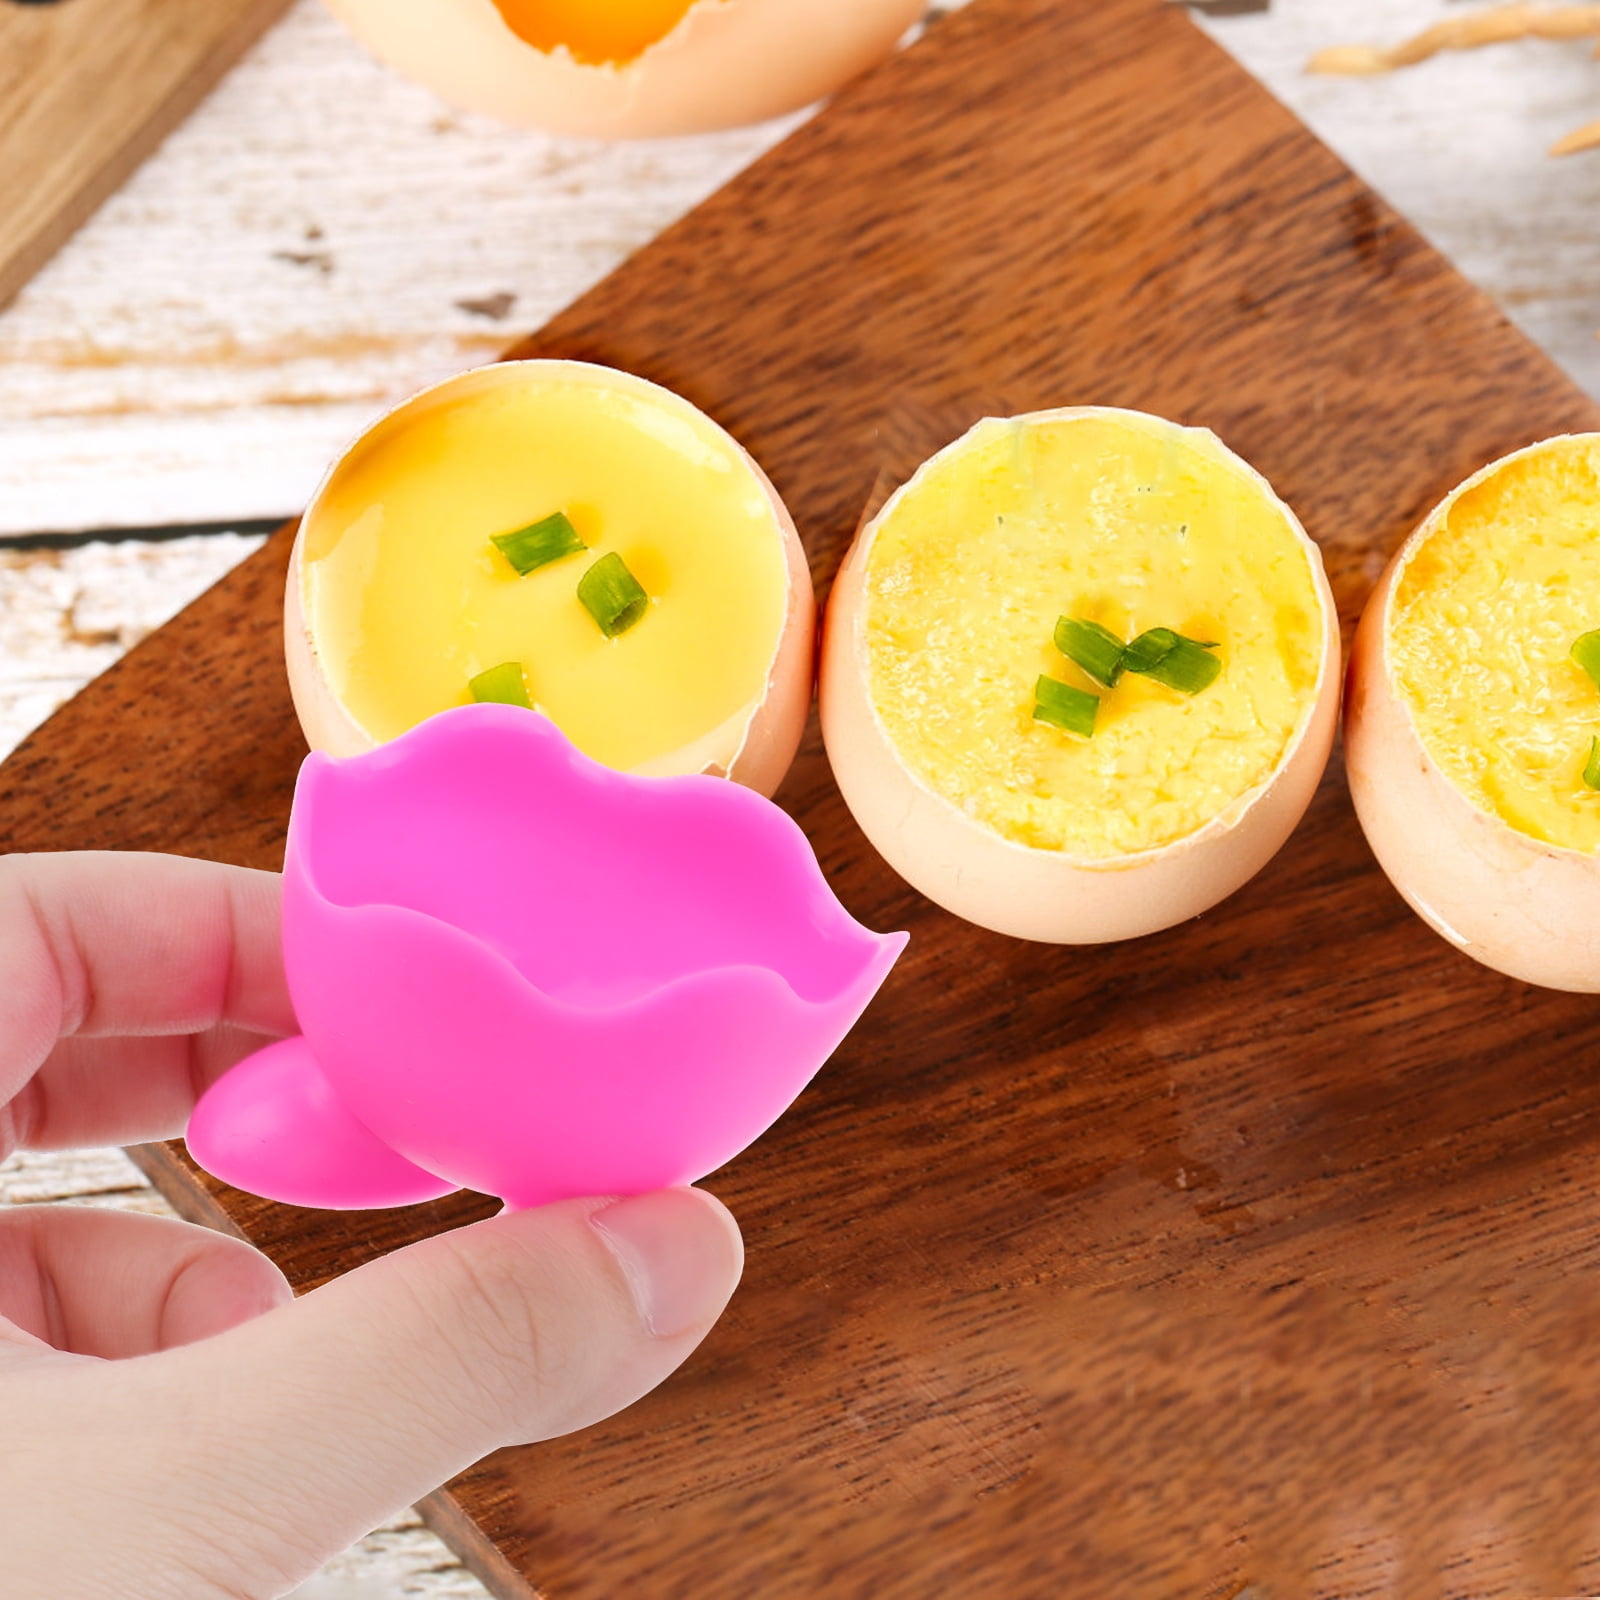 Silicone Egg Cooker Rack, Heat Insulation Pot Mat Mold, Round Egg